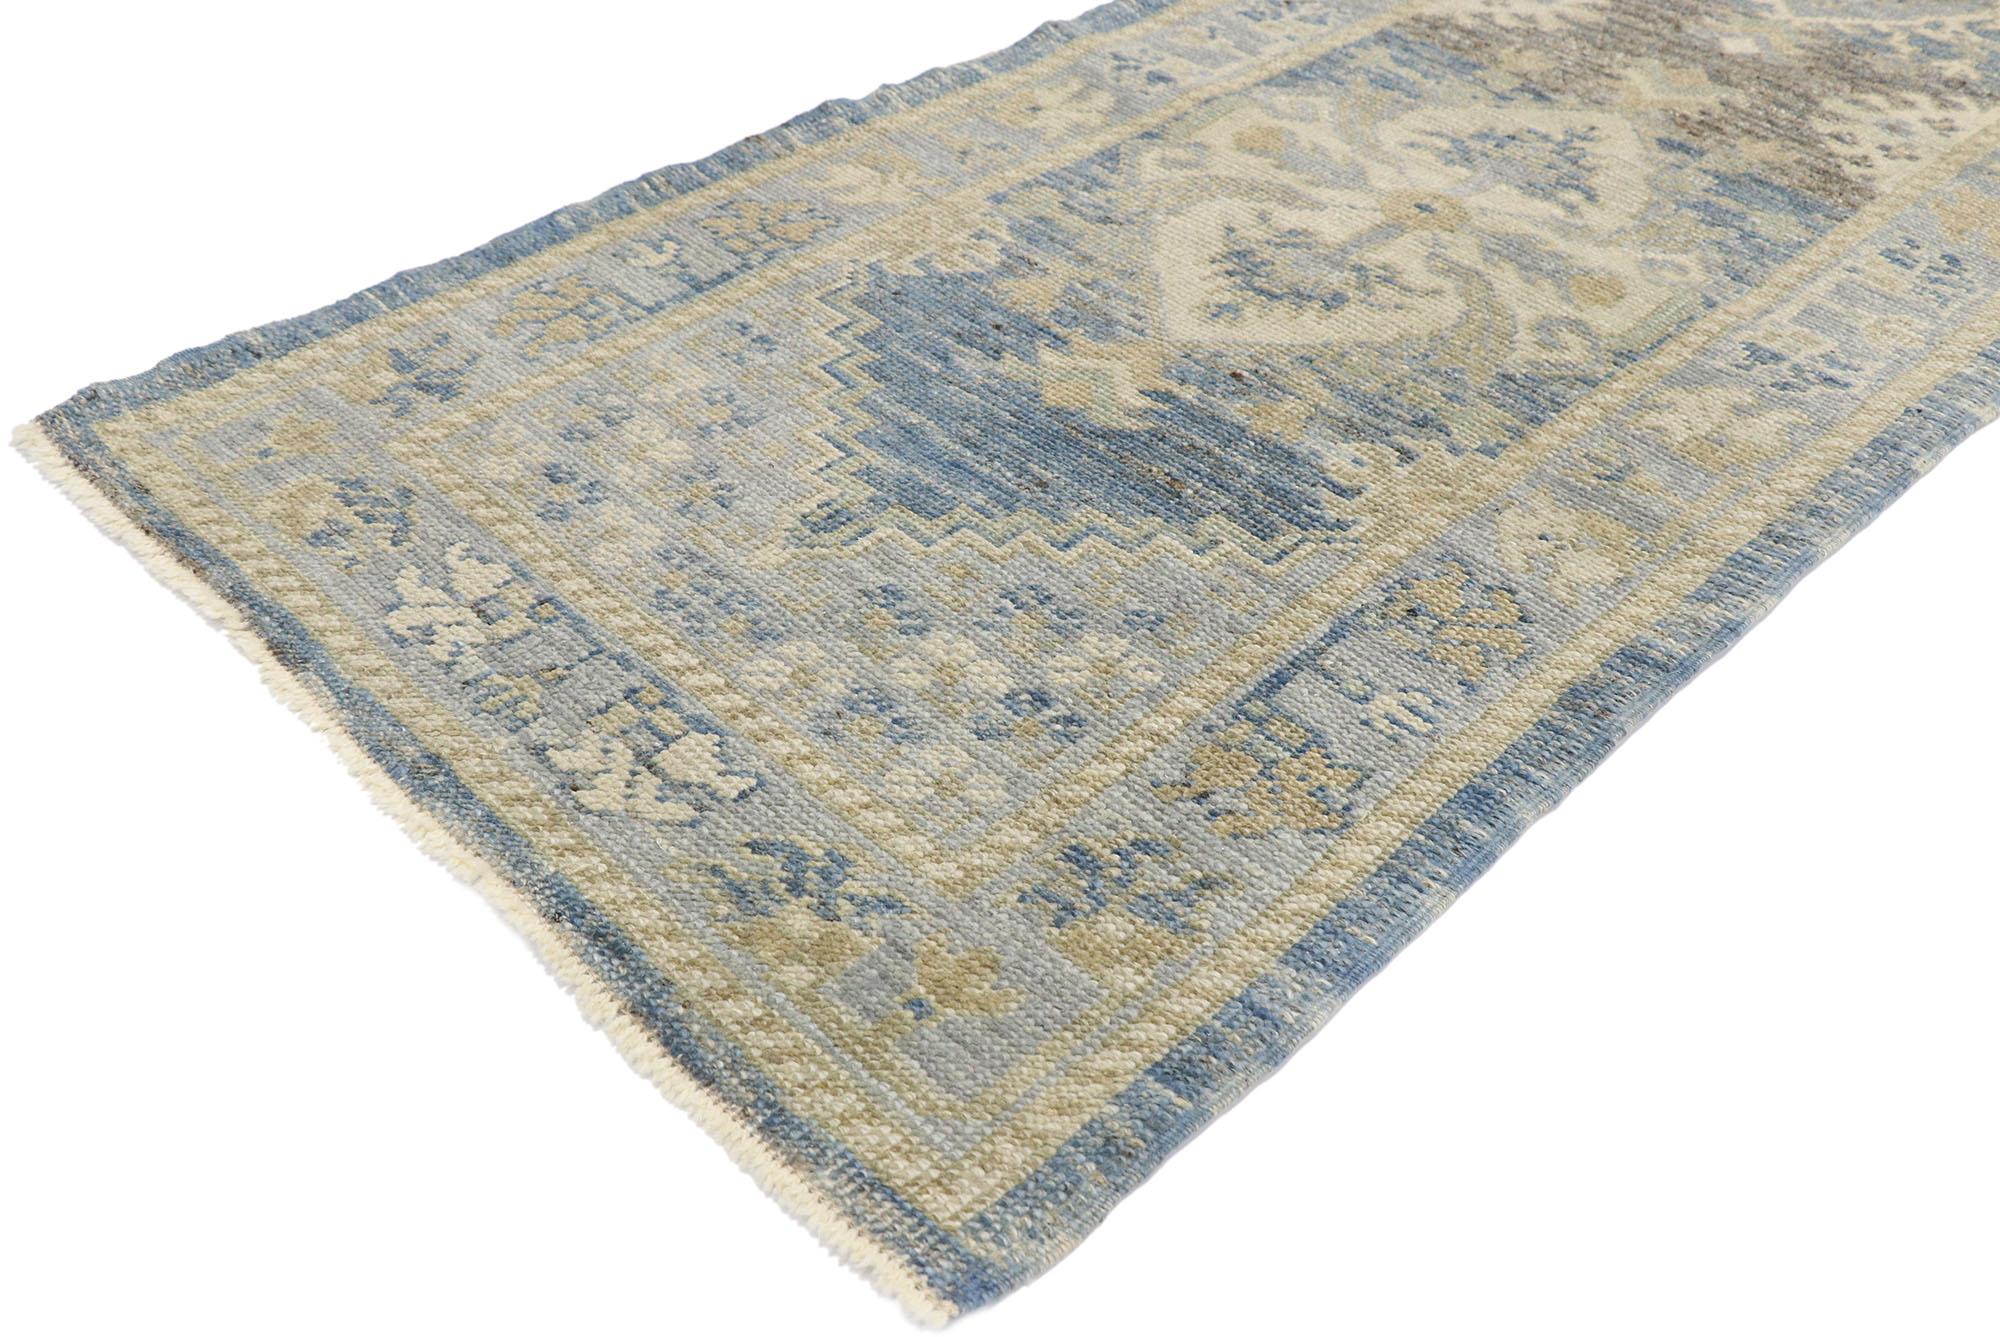 53541, new contemporary Turkish Oushak Runner with Modern style. Elegant simplicity meets modern style in this hand-knotted wool contemporary Turkish Oushak runner. Set with three elaborate medallions decorated with a botanical pattern against an